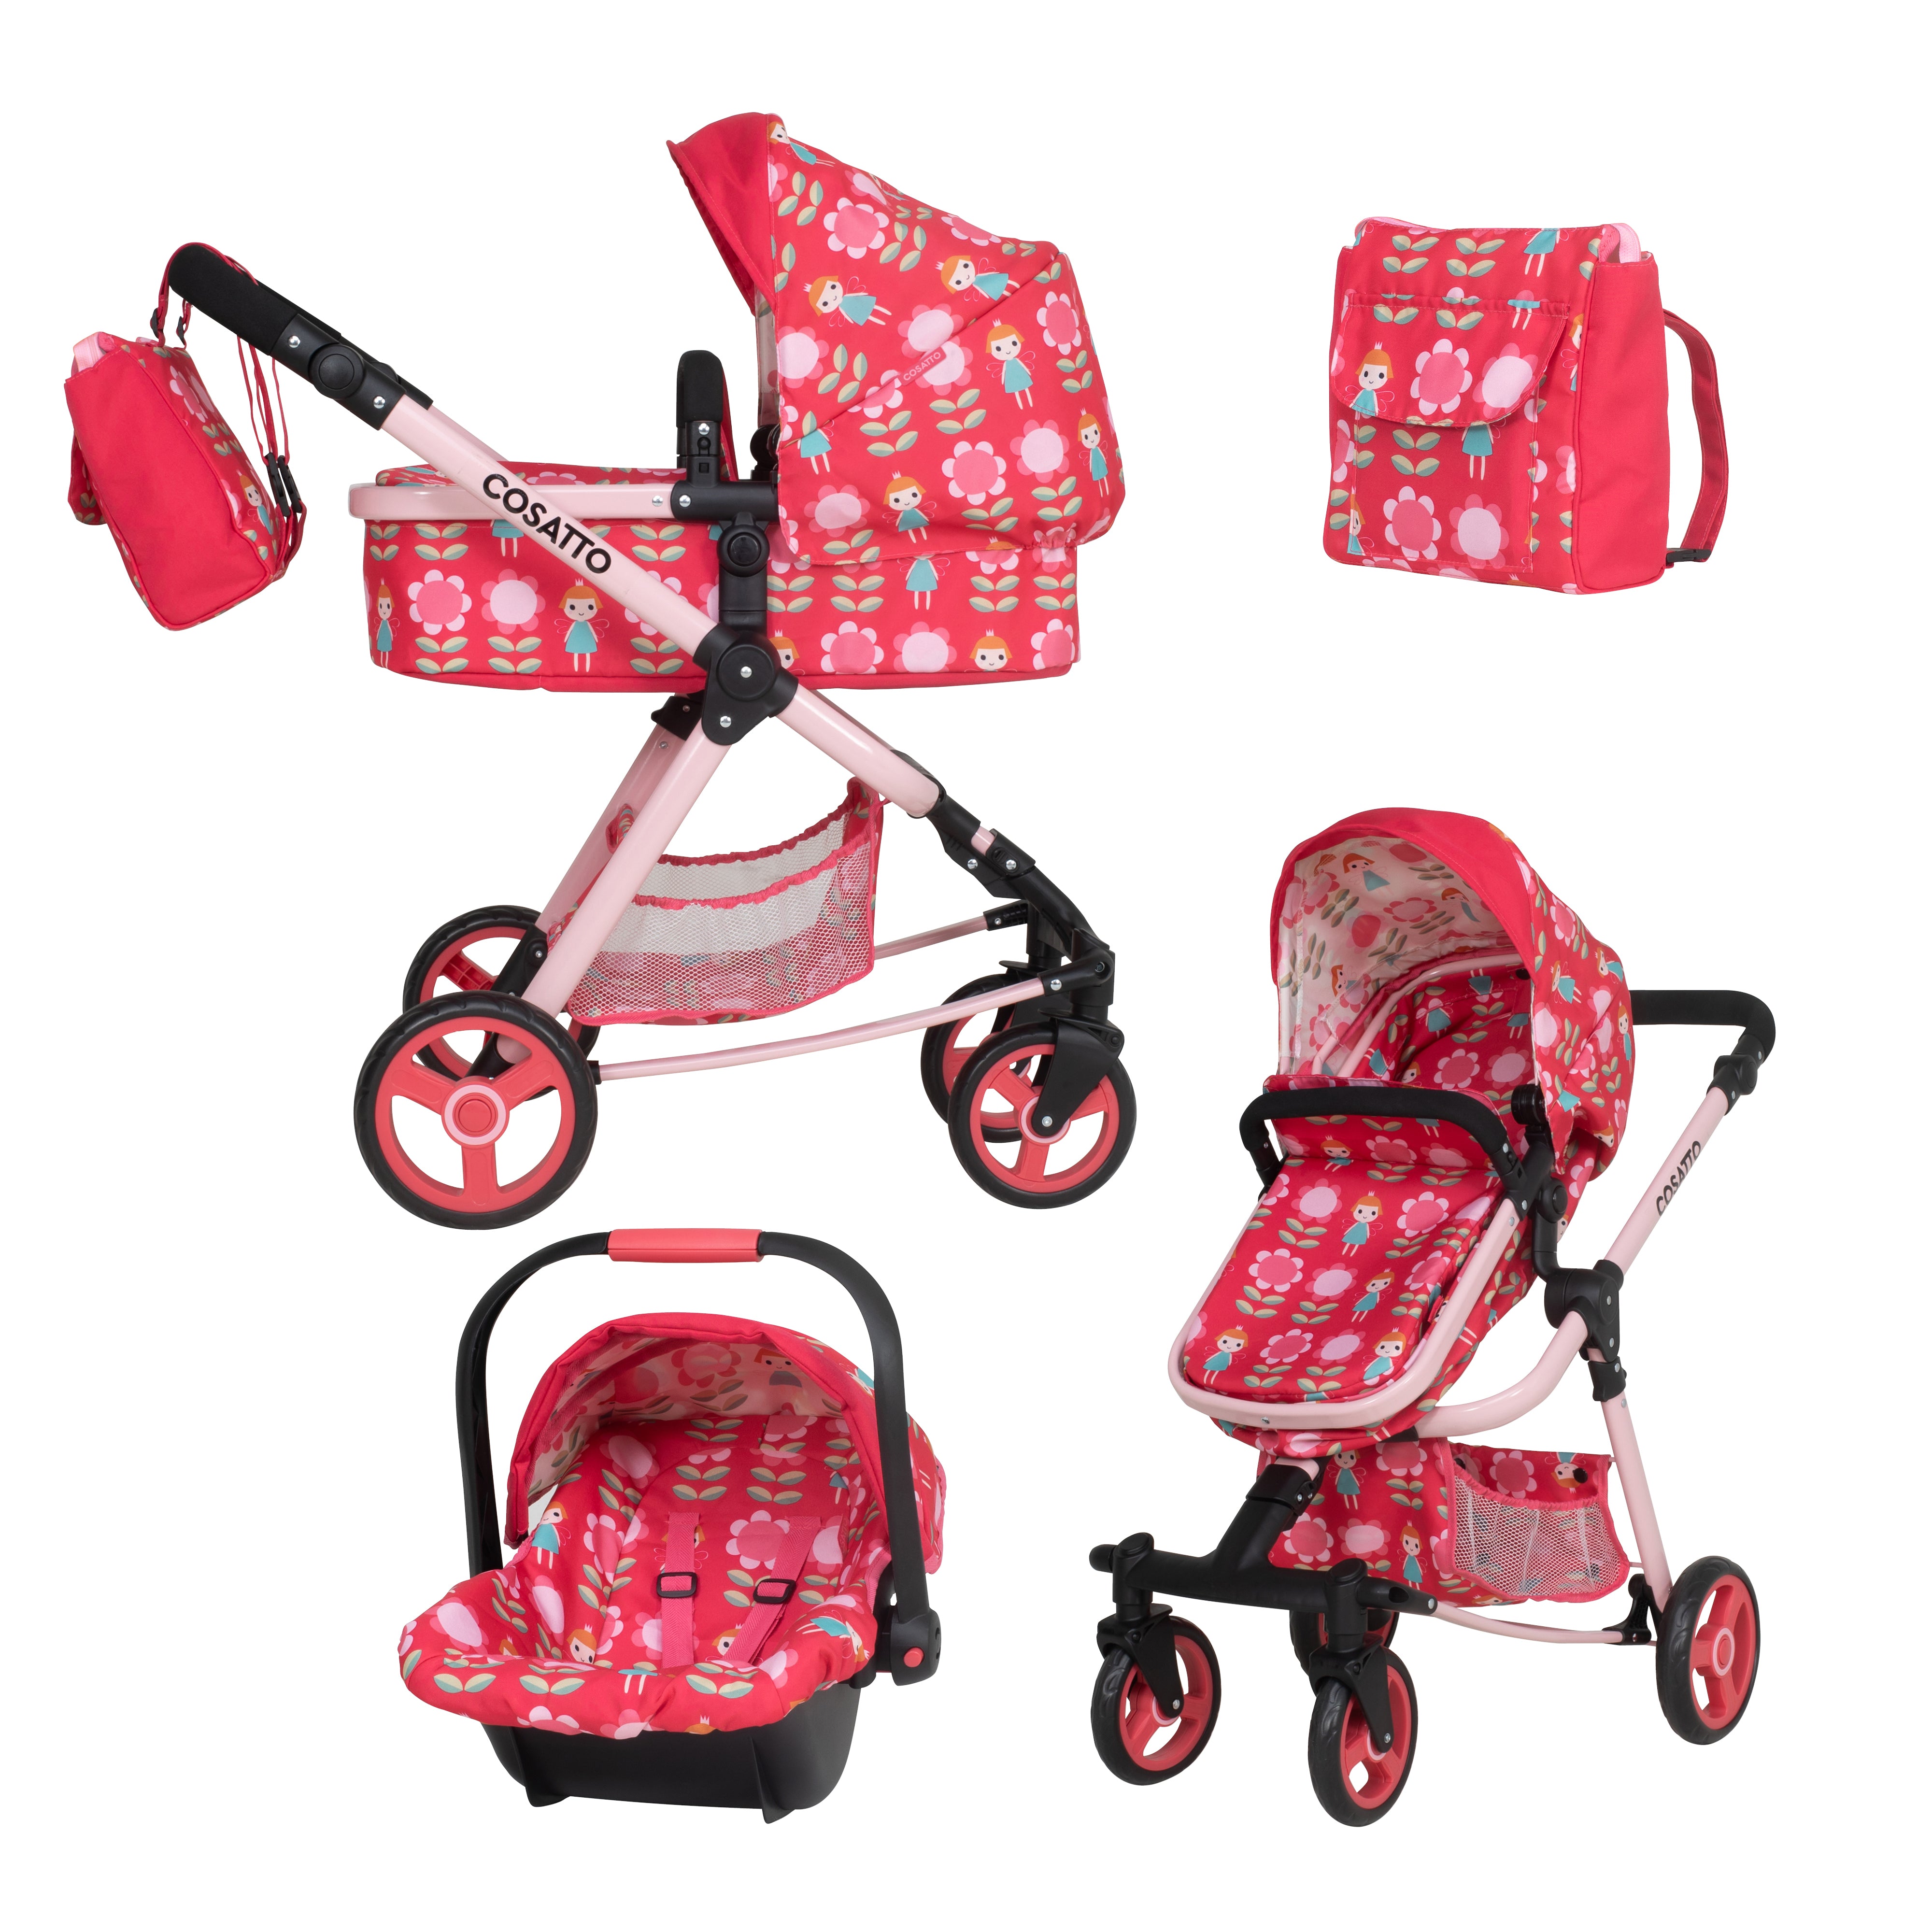 Pink flower and fairy print dolls pram with change bag, car seat and seat unit